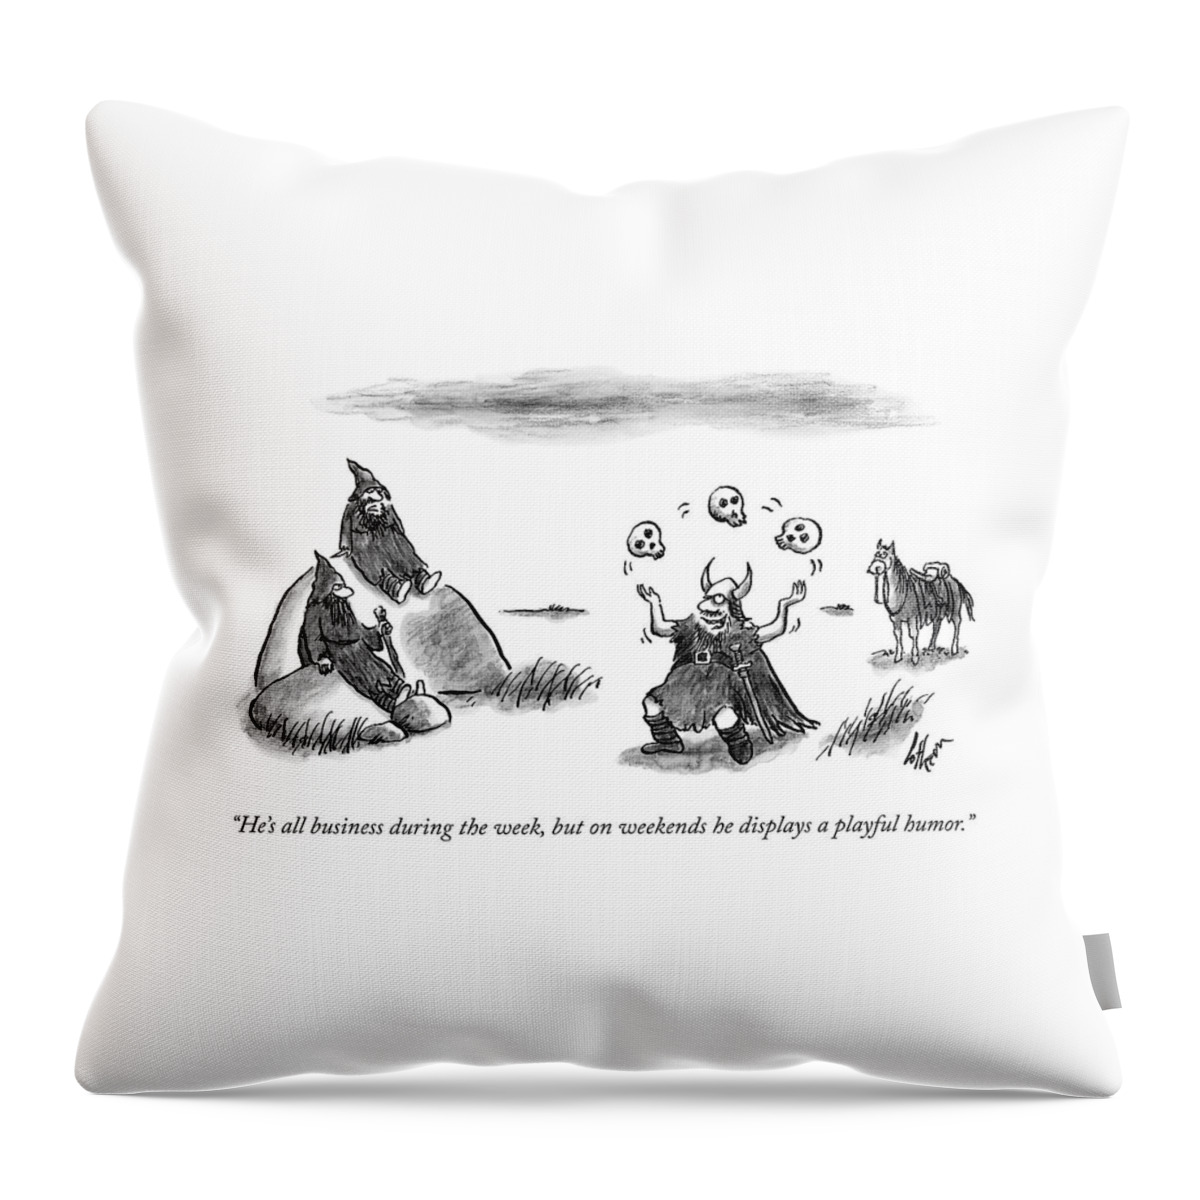 Two Visigoths Watch A Visigoth Soldier Juggles Throw Pillow